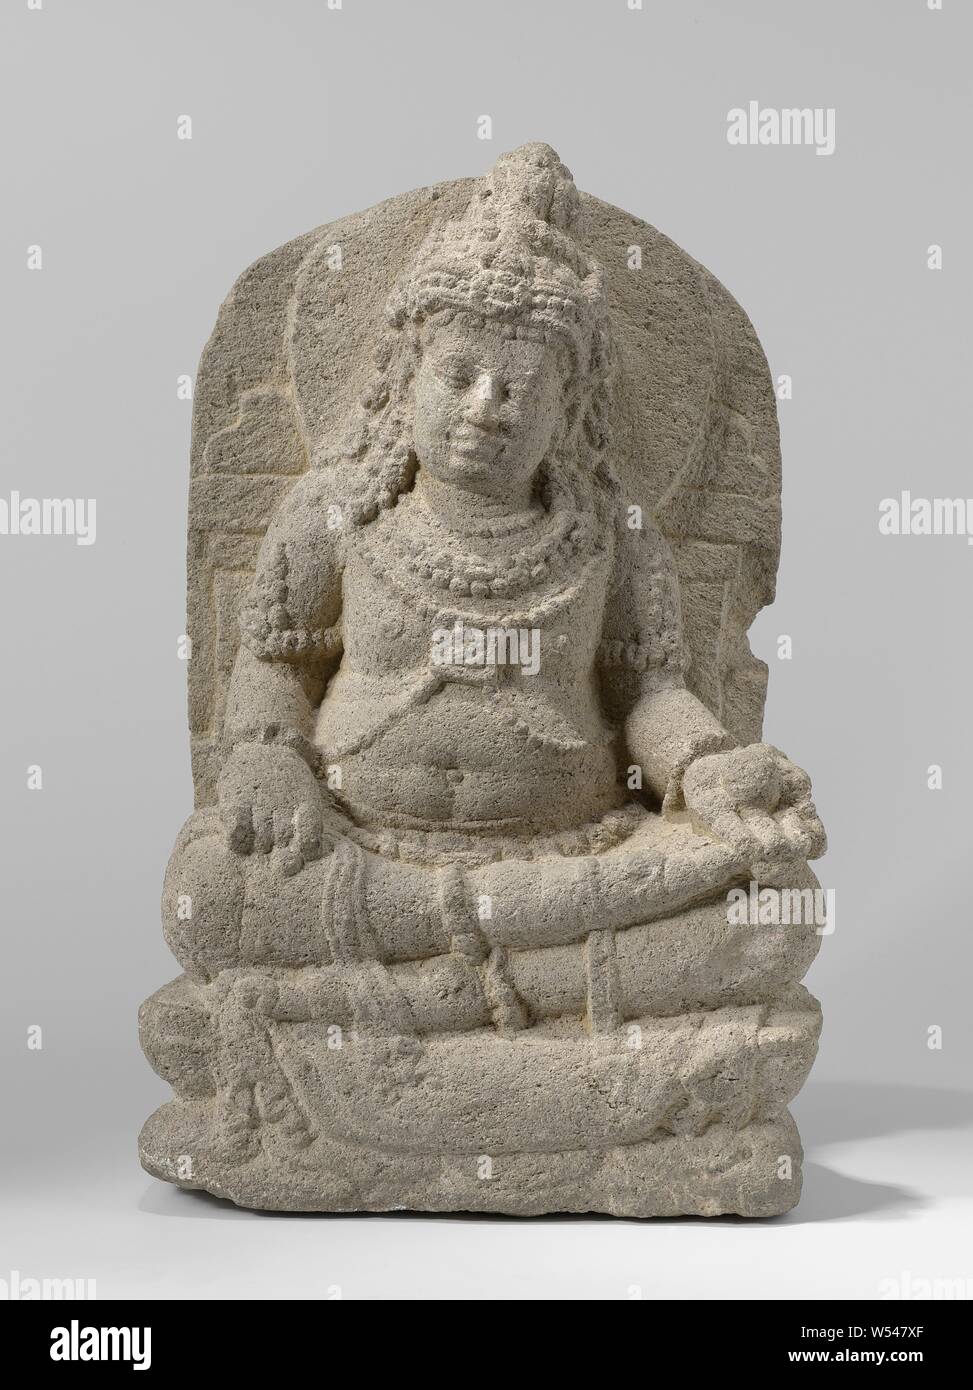 Image of the god of wealth Kubera, Image of the god of wealth Kubera., Gedong Songo, 775 - 825, andesite, extrusive rock, h 39.5 cm × w 25.2 cm × d 15.6 cm × w 15.9 kg Stock Photo